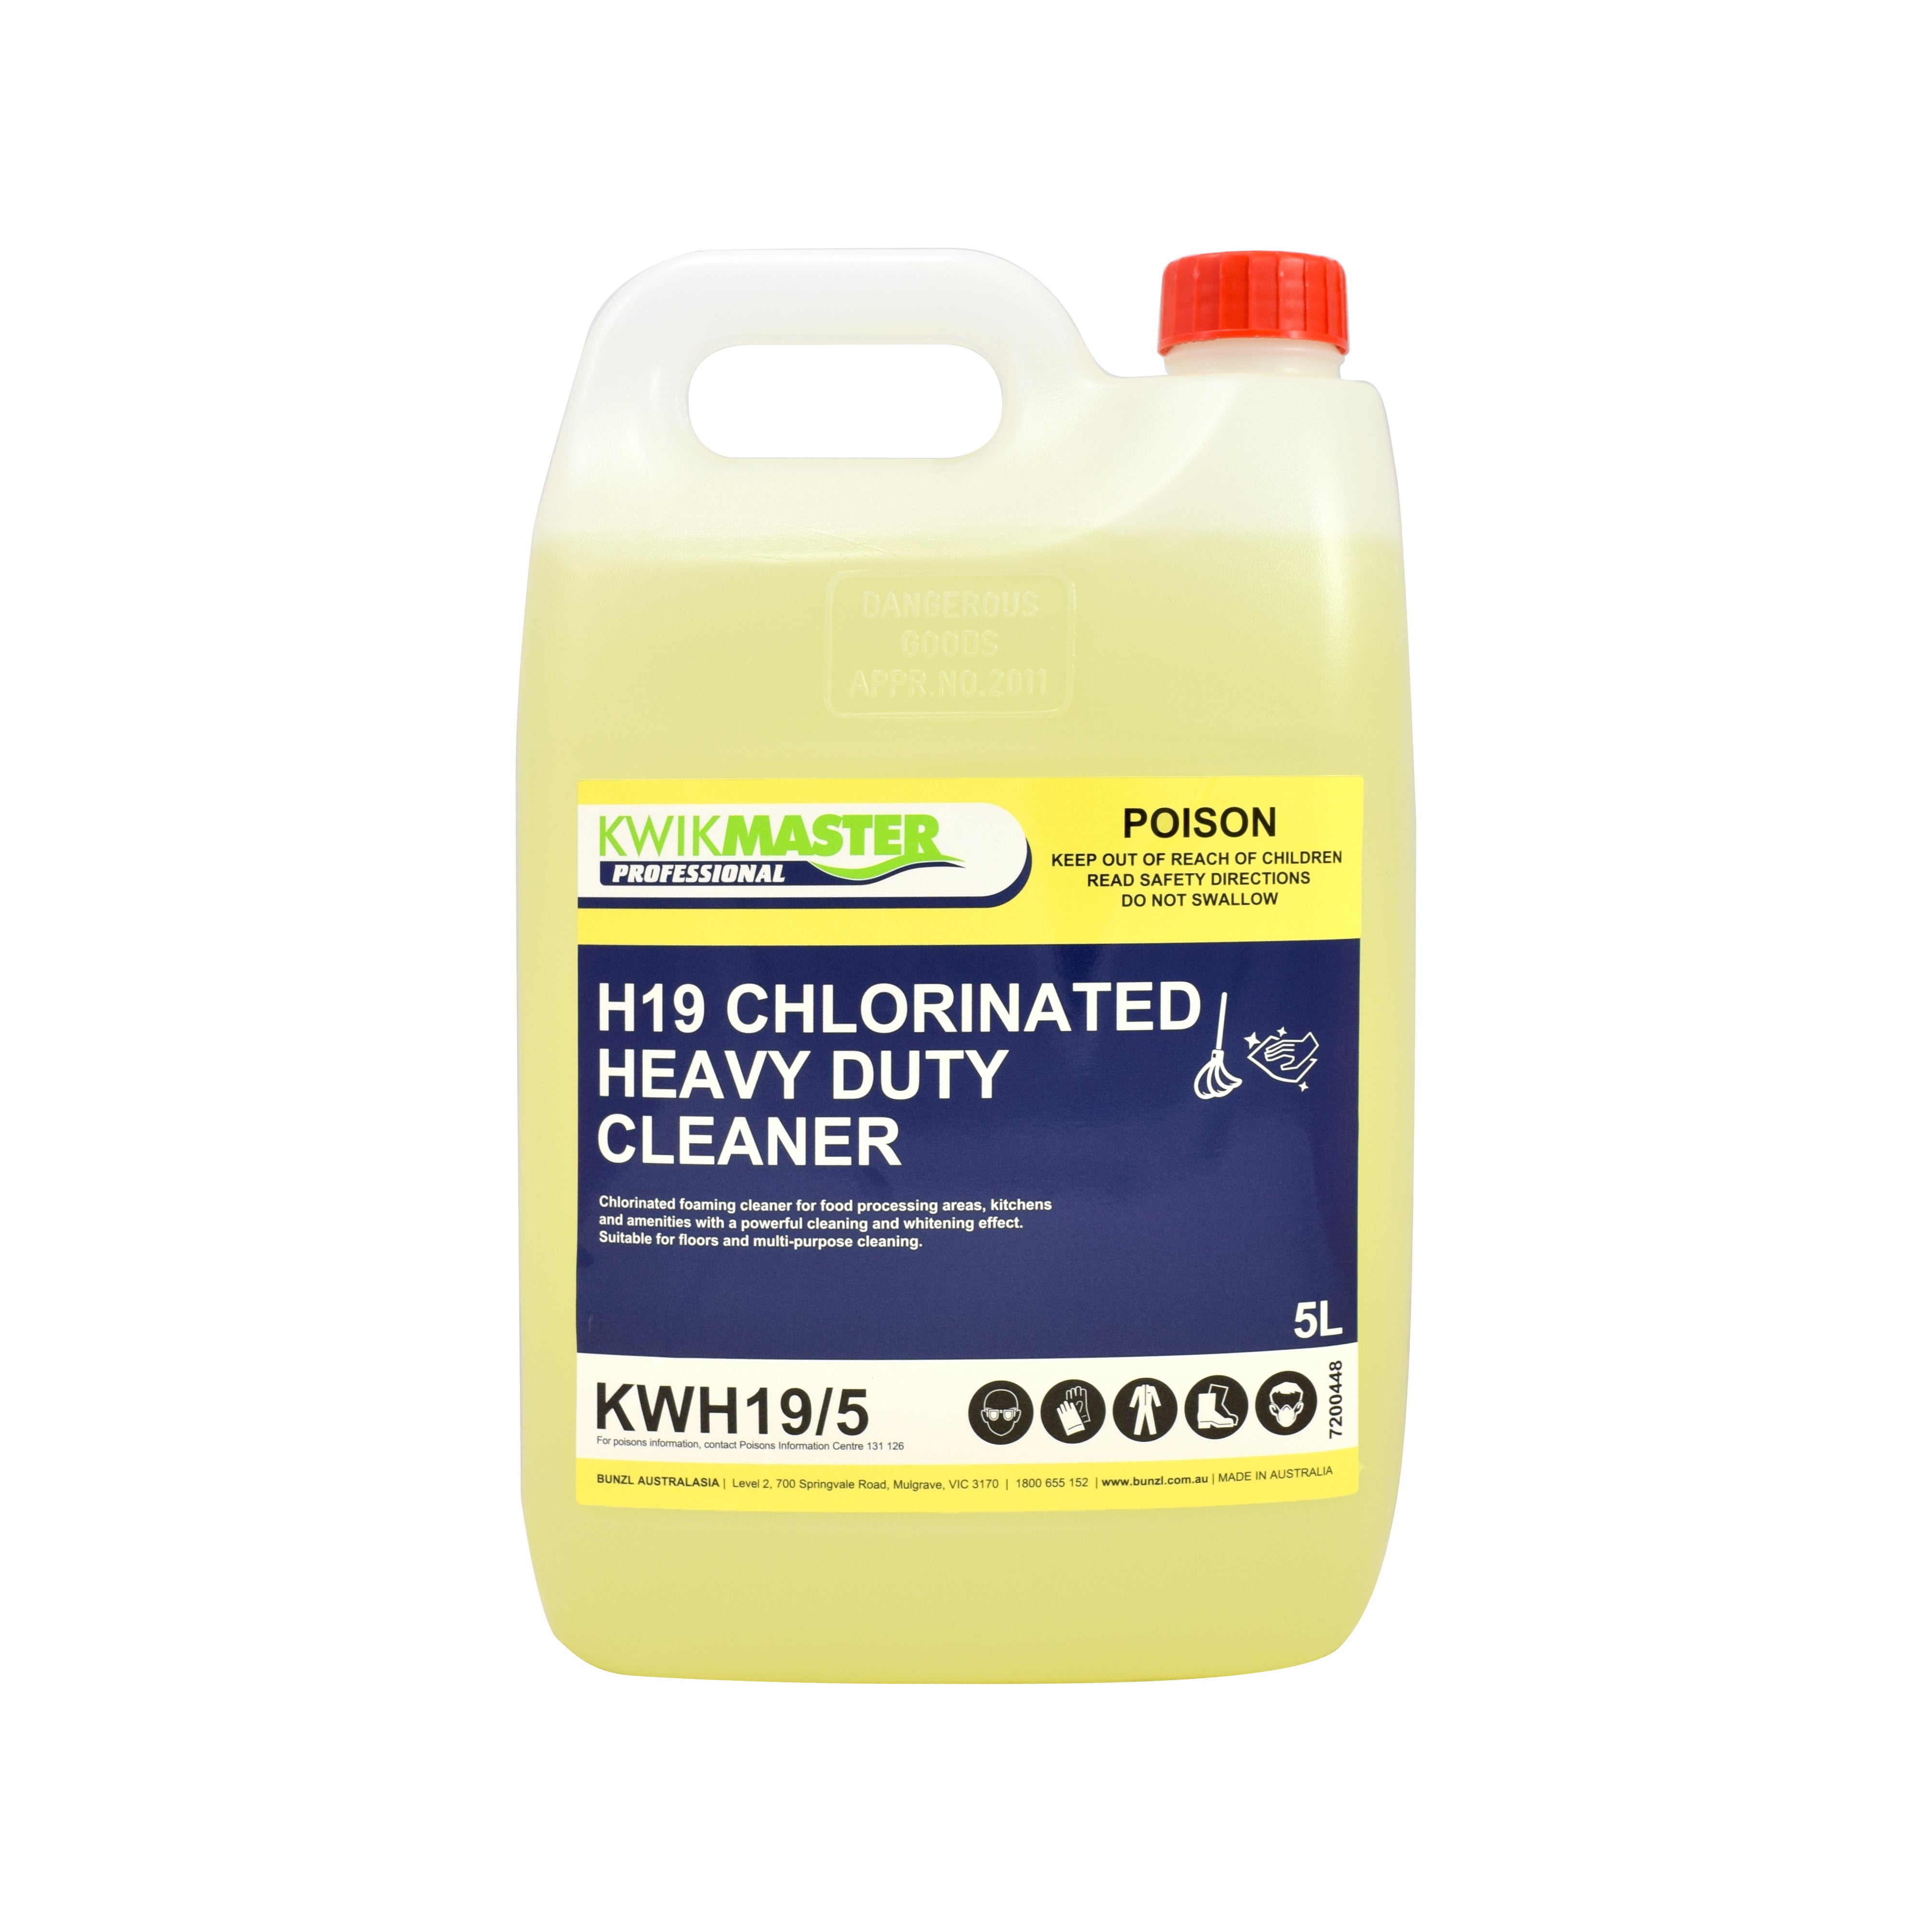 Kwikmaster Professional Kwikmaster H19 Chlorinated Heavy Duty Cleaner 5L - CT/3 Cleaning & Washroom Supplies  